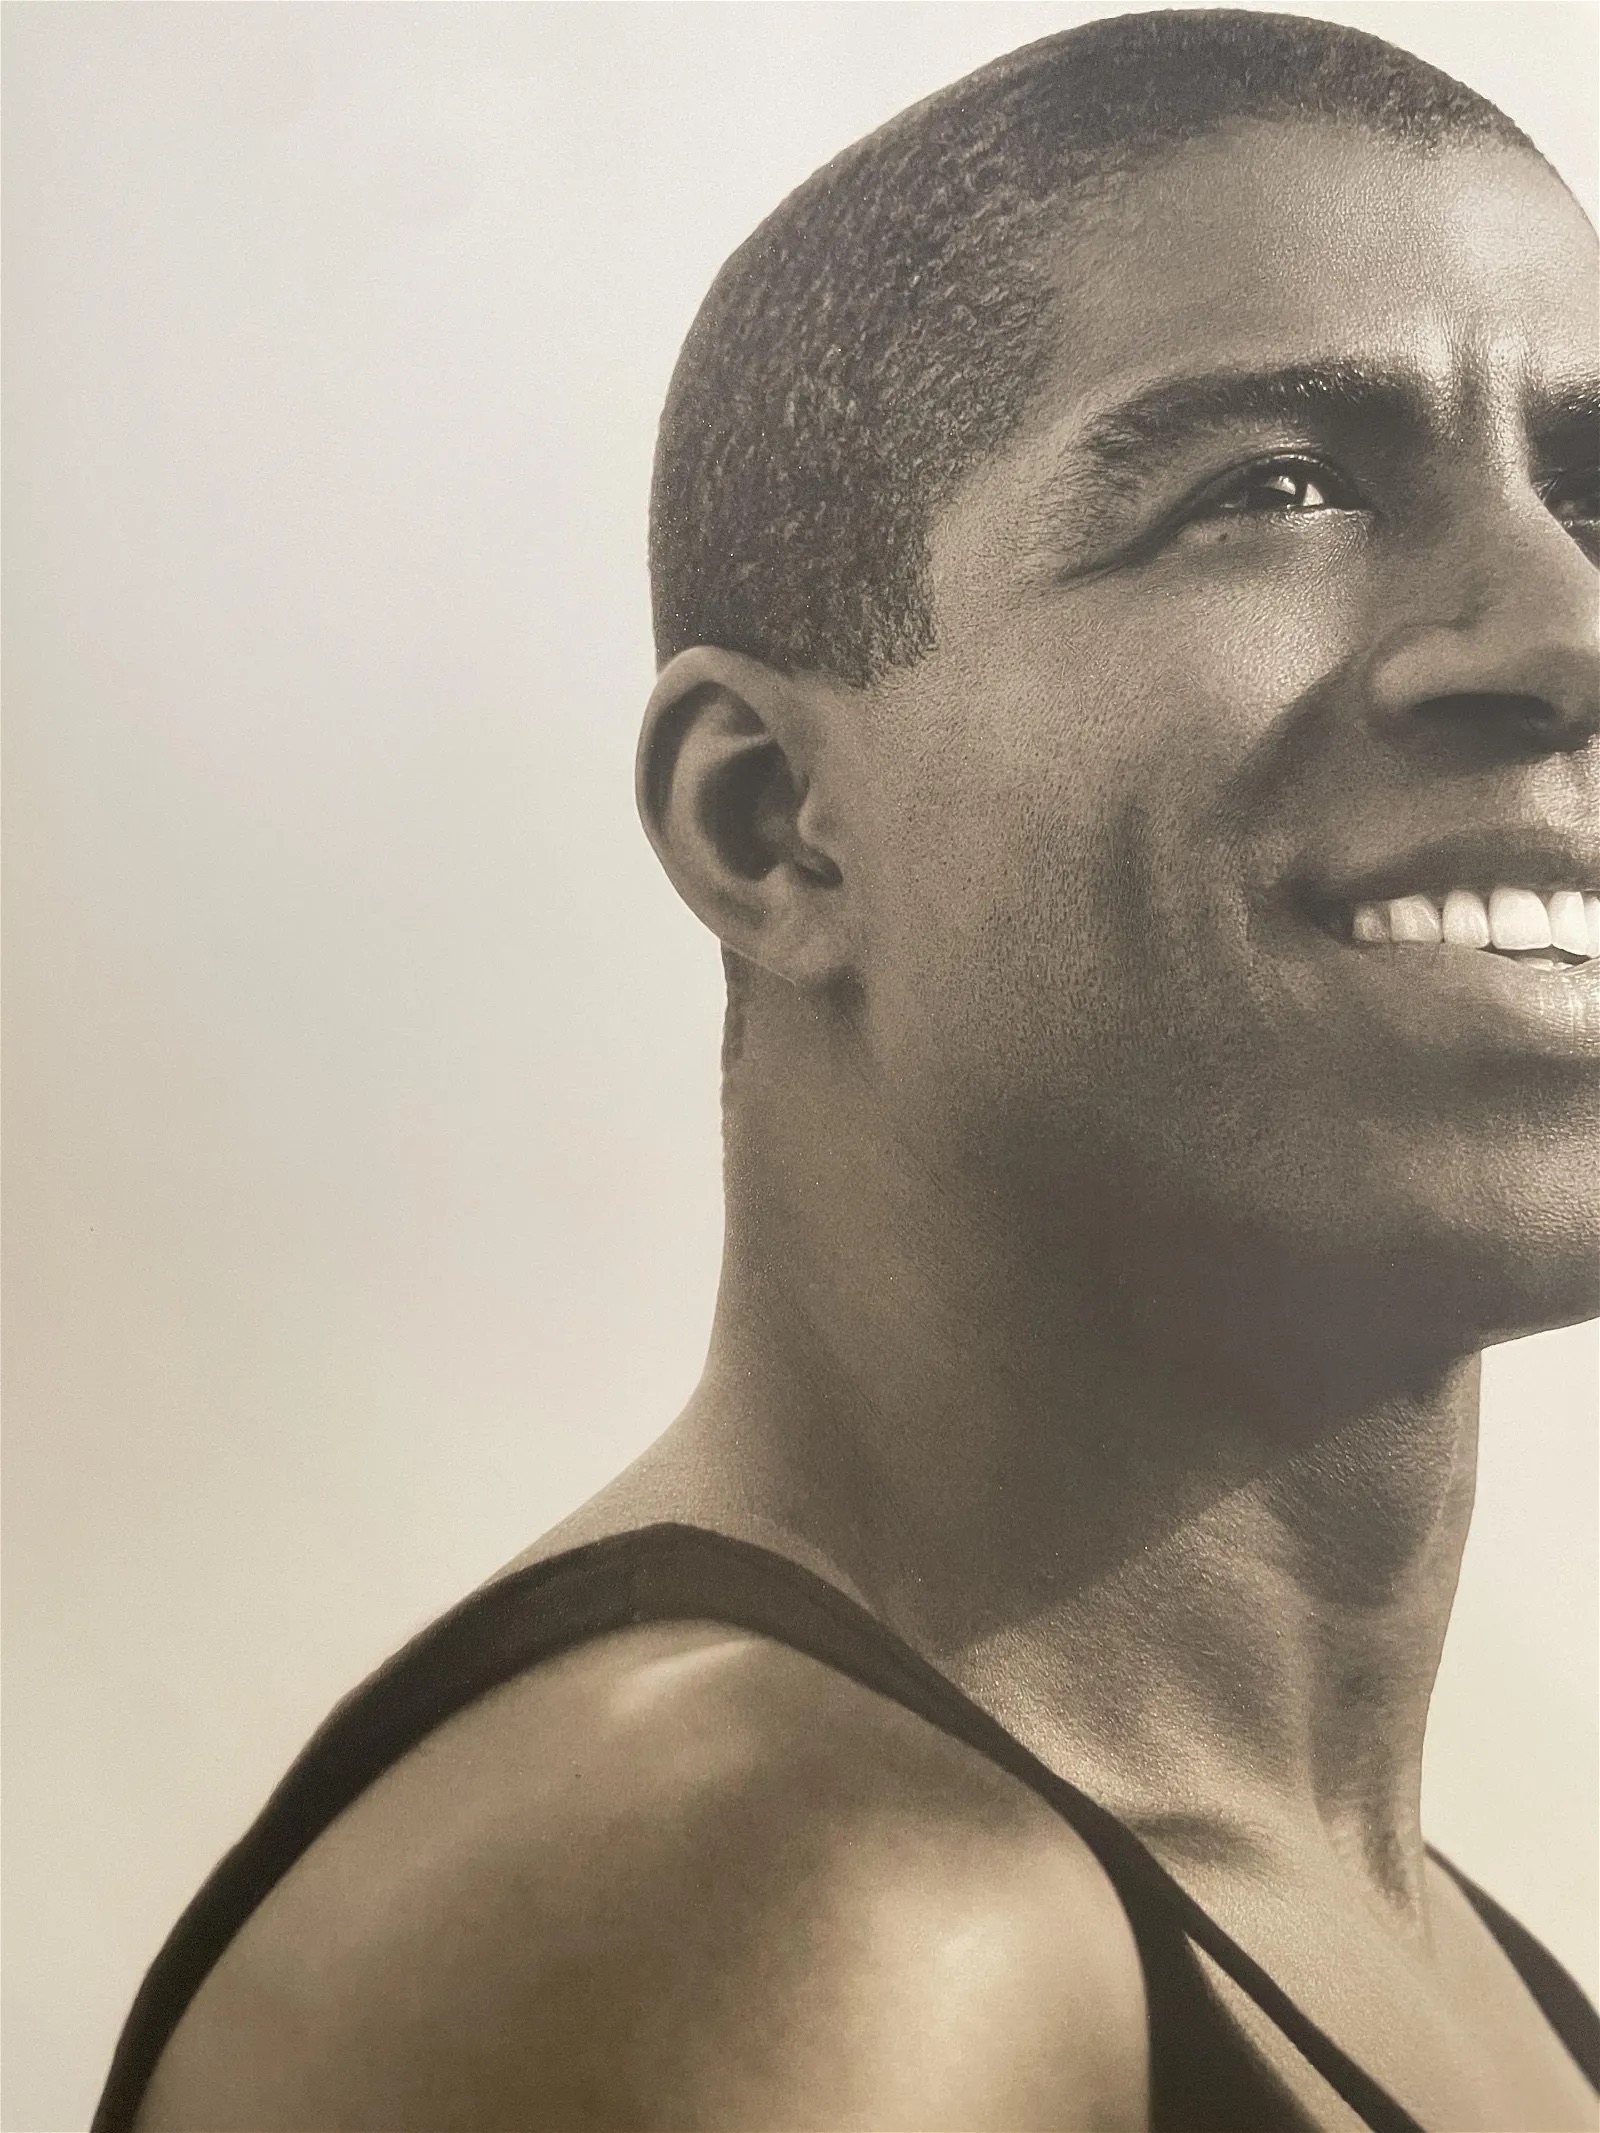 Herb Ritts "Earvin Magic Johnson, Hollywood, 1992" Print - Image 3 of 6